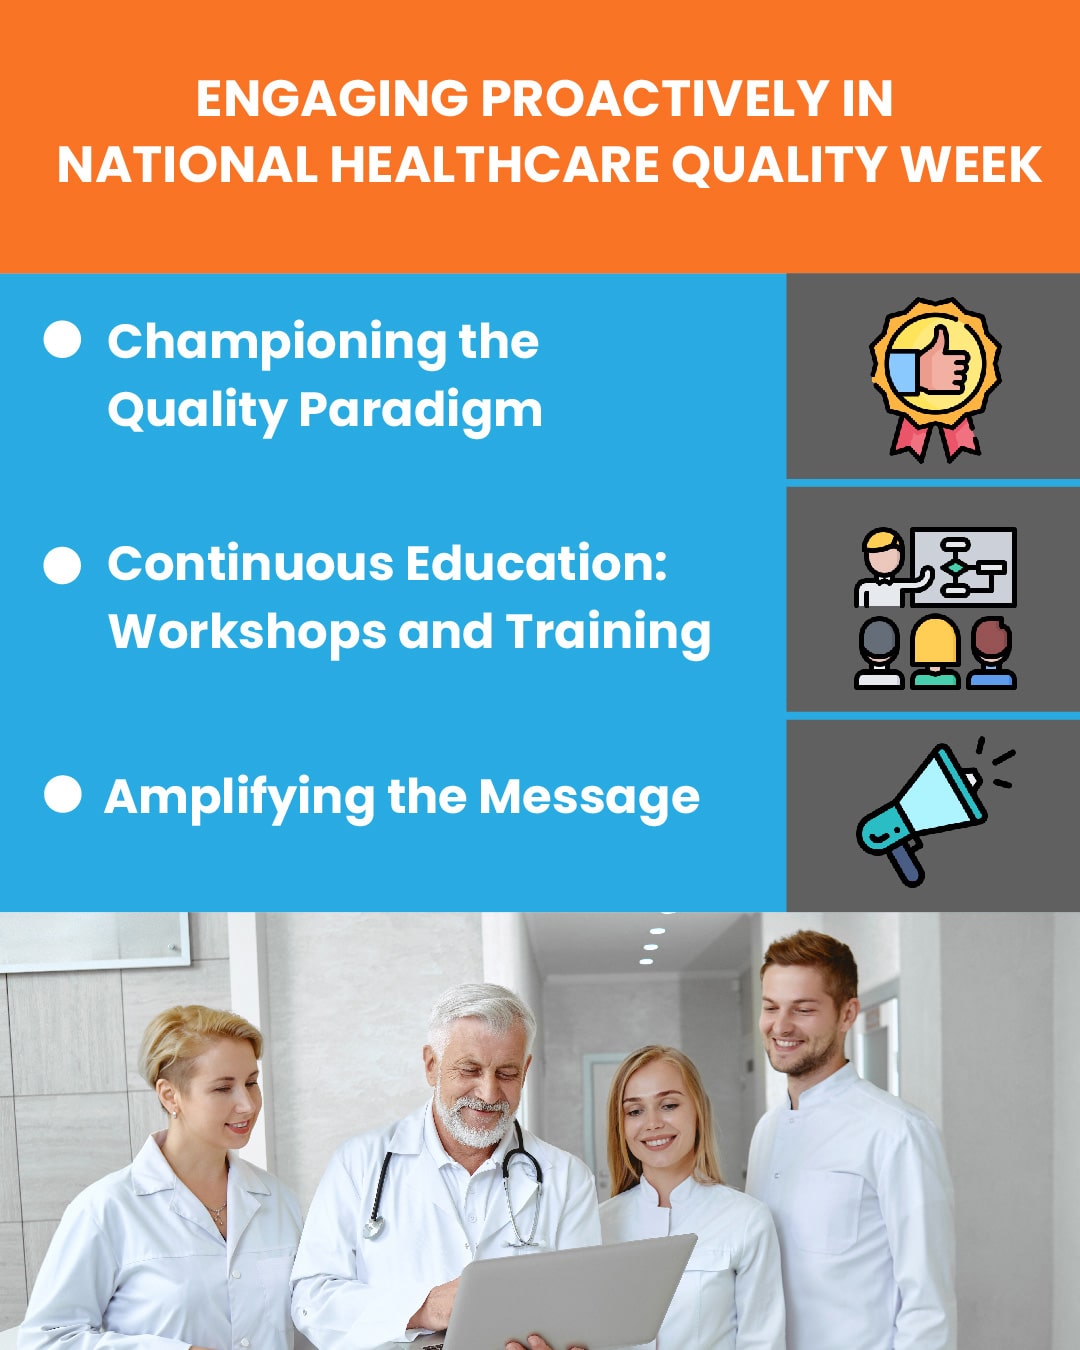 Poster for National Healthcare Quality Week showcasing three key activities